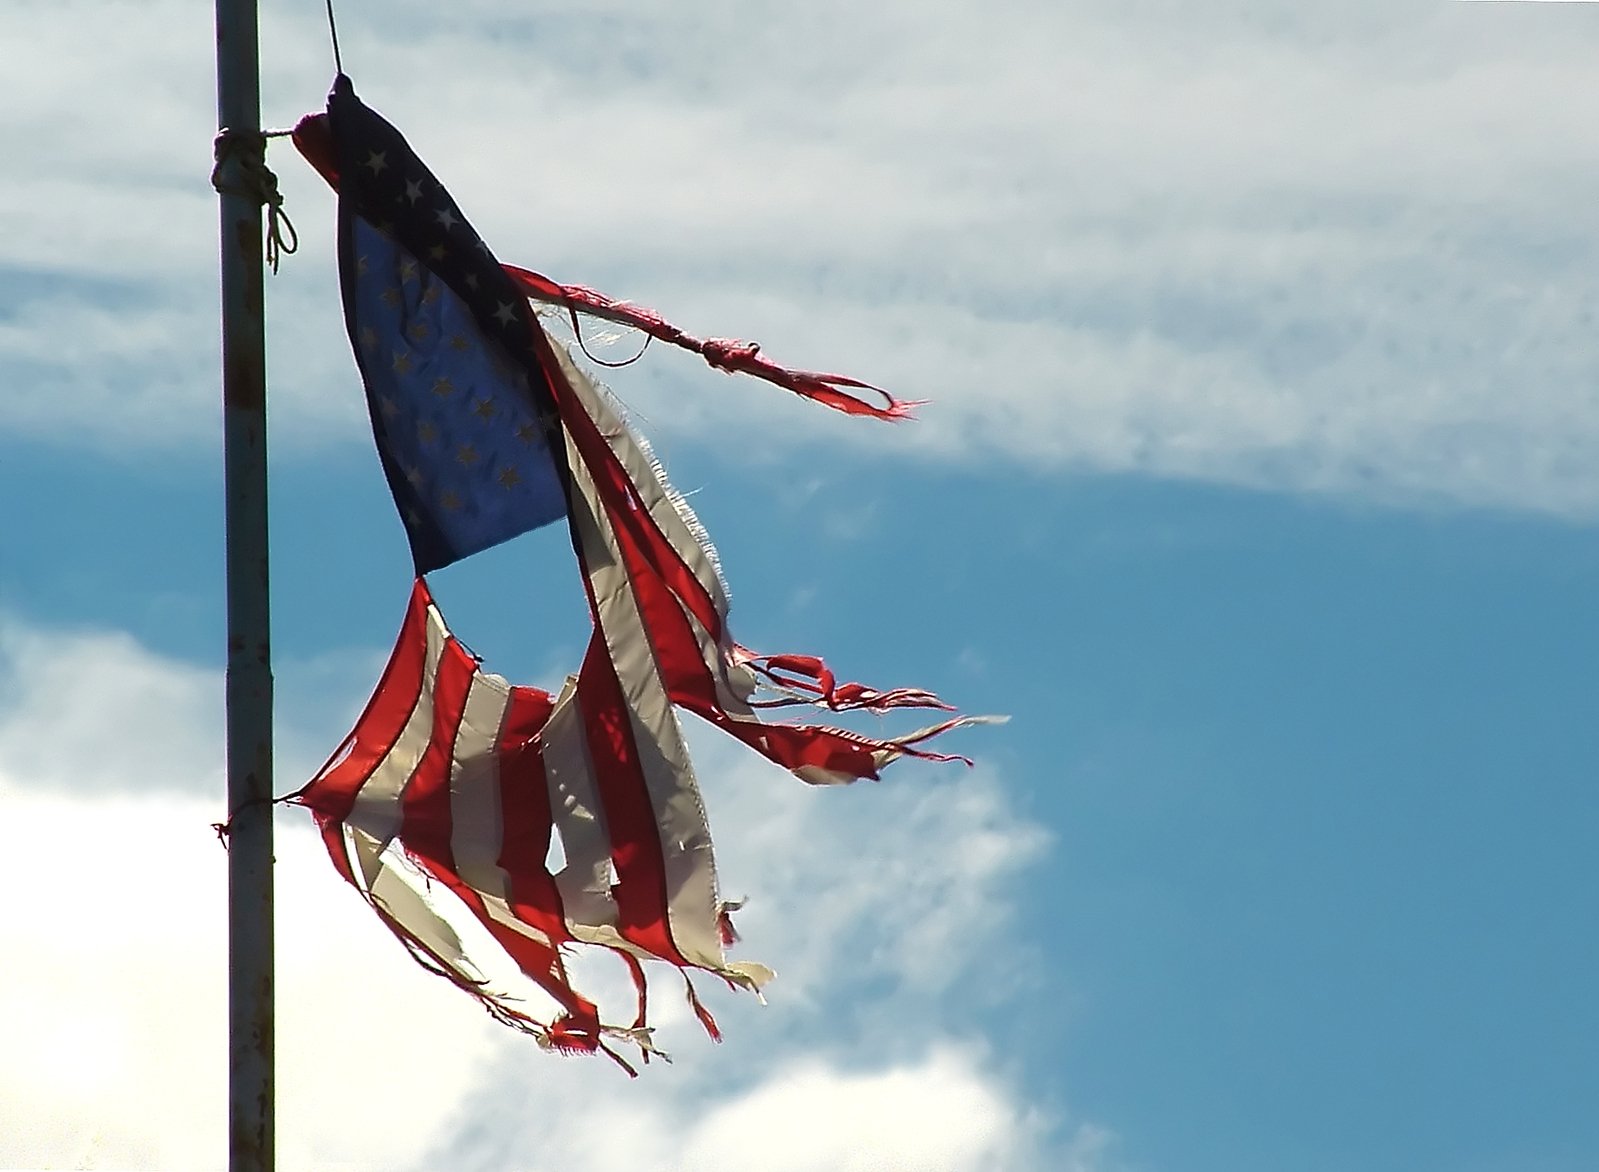 two flags are waving in the wind under a cloudy blue sky